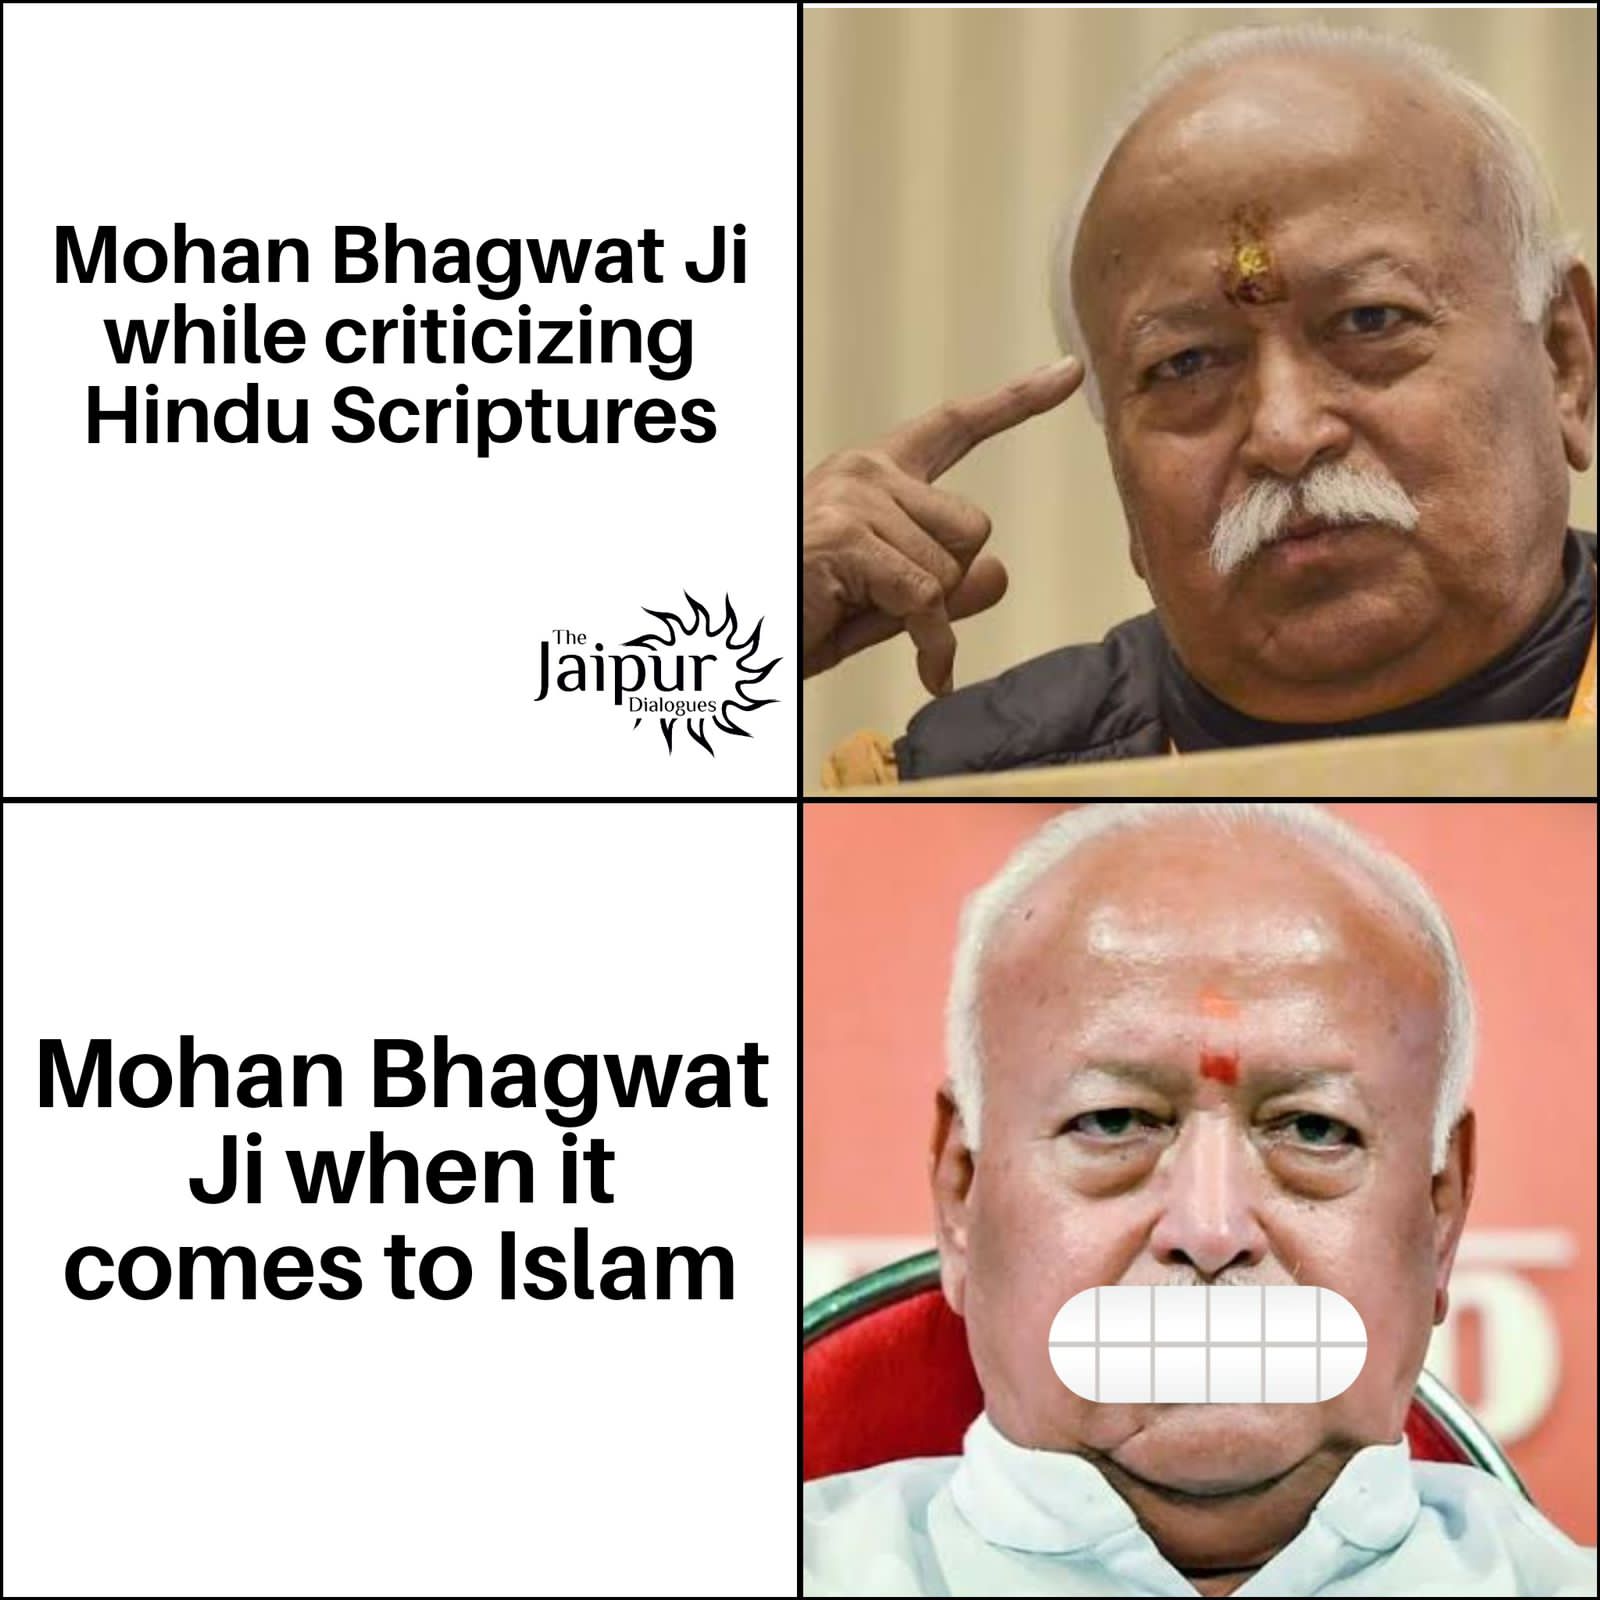 Selfish people inserted absolutely wrong things into Hindu scriptures. Those scriptures need to be scrutinized: Param Pujya Mohan Bhagwat Ji